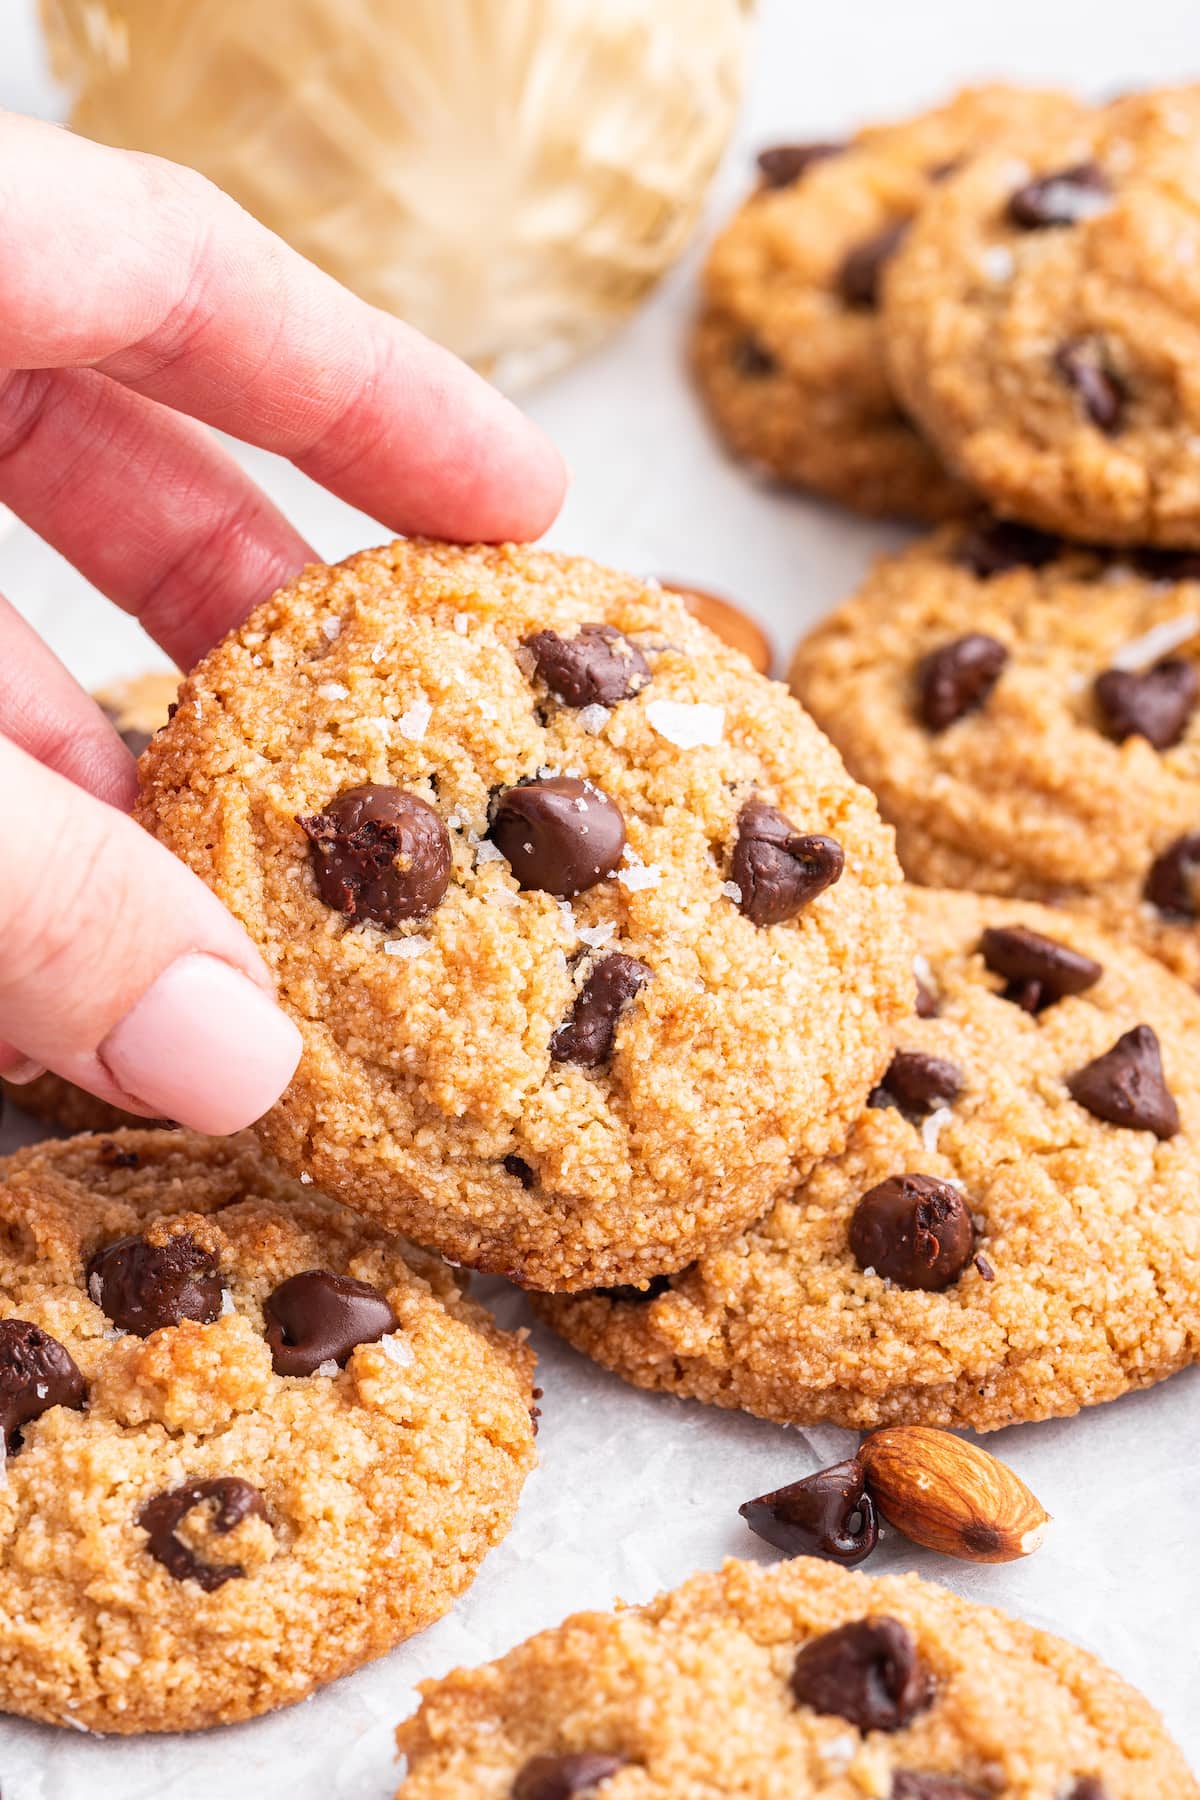 A woman's hand holding an almond flour chocolate chip cookie with multiple other cookies in the background.